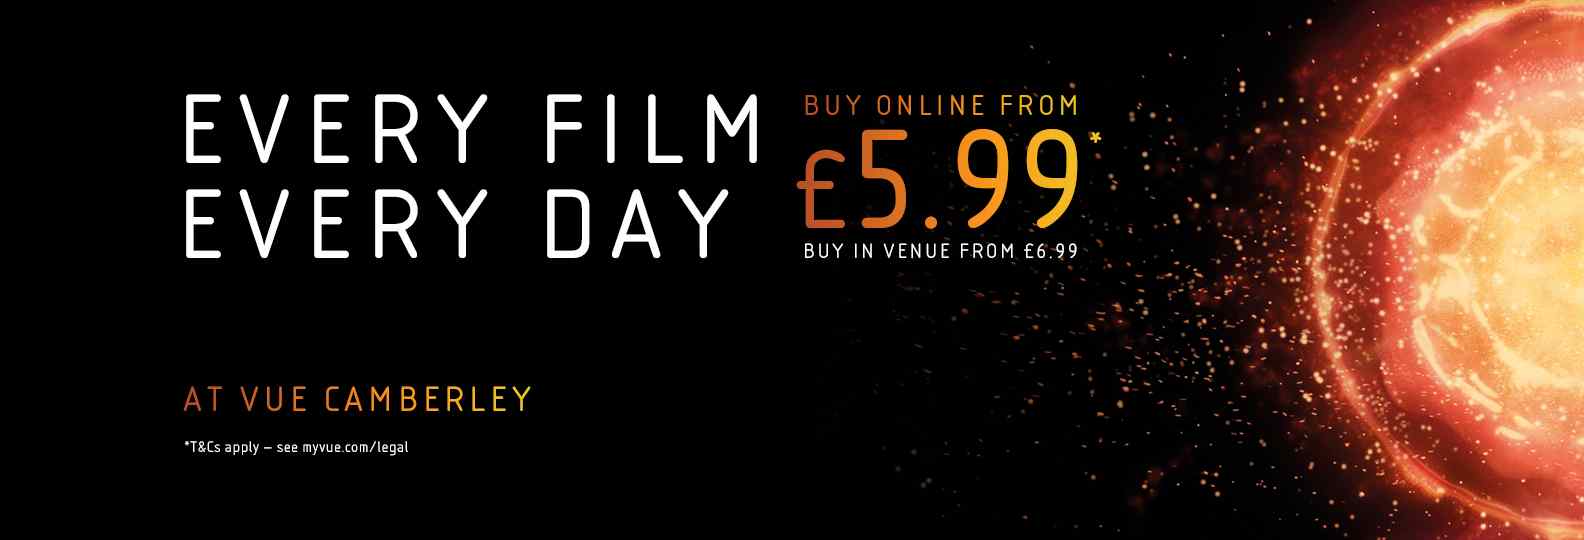 Vue Camberley | Every Film, Every Day from £5.99